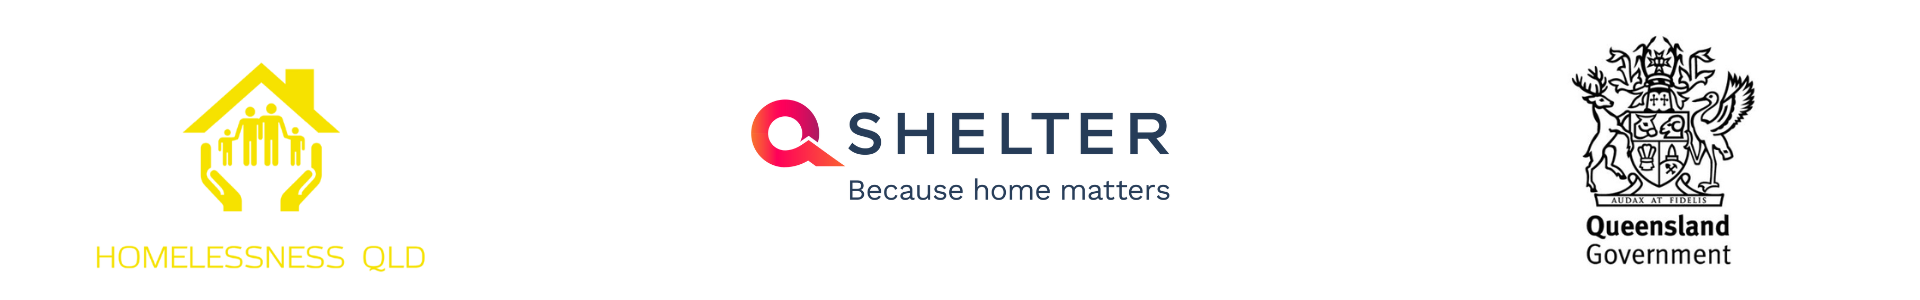 Logos of Homelessness Qld, Q Shelter and Queensland Government